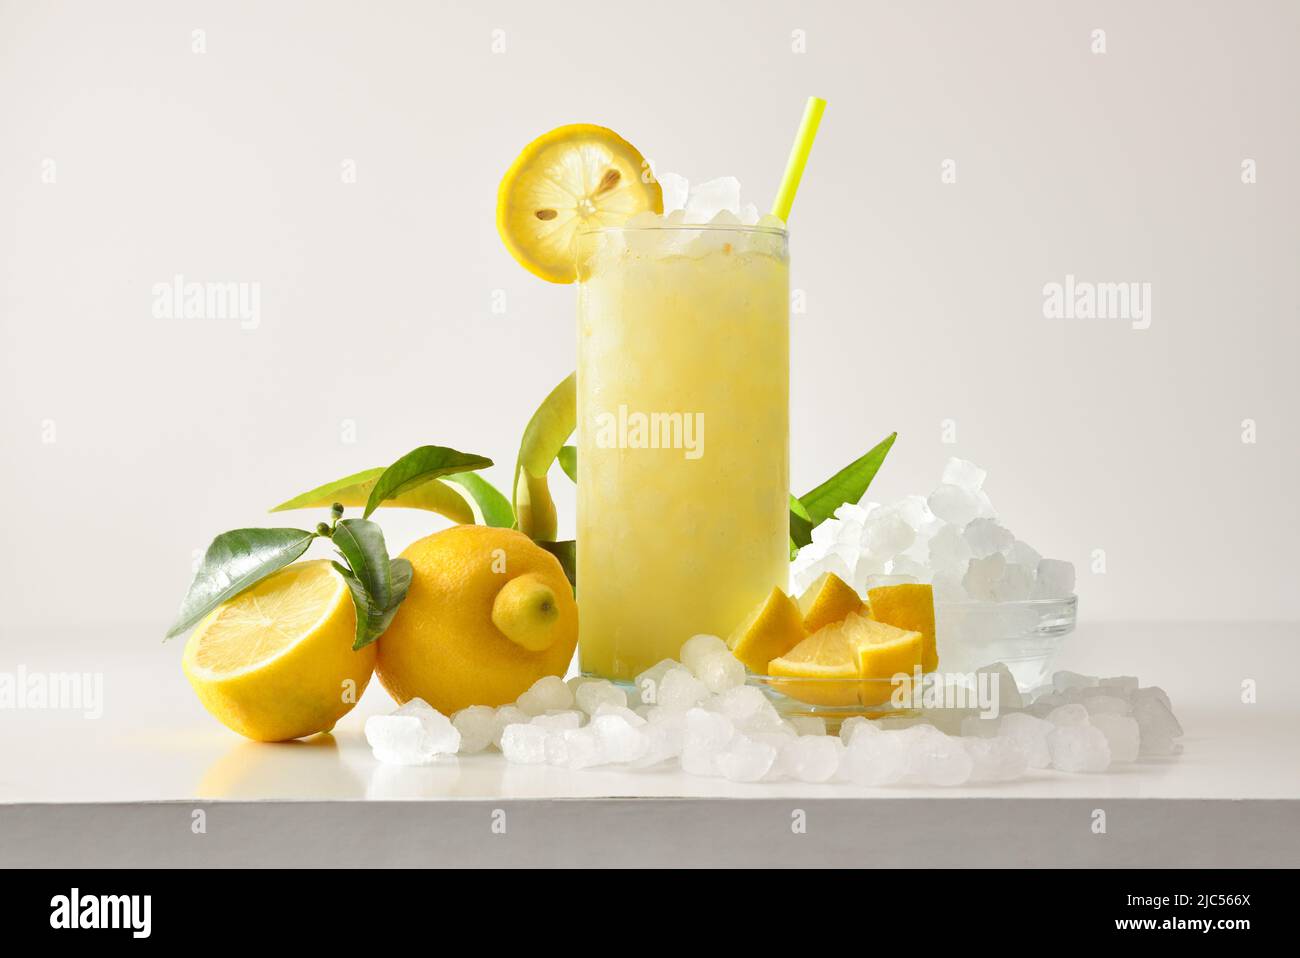 Lemon slush in tall glass with fruit and crushed ice around it on white table with isolated background. Front view. Horizontal composition. Stock Photo